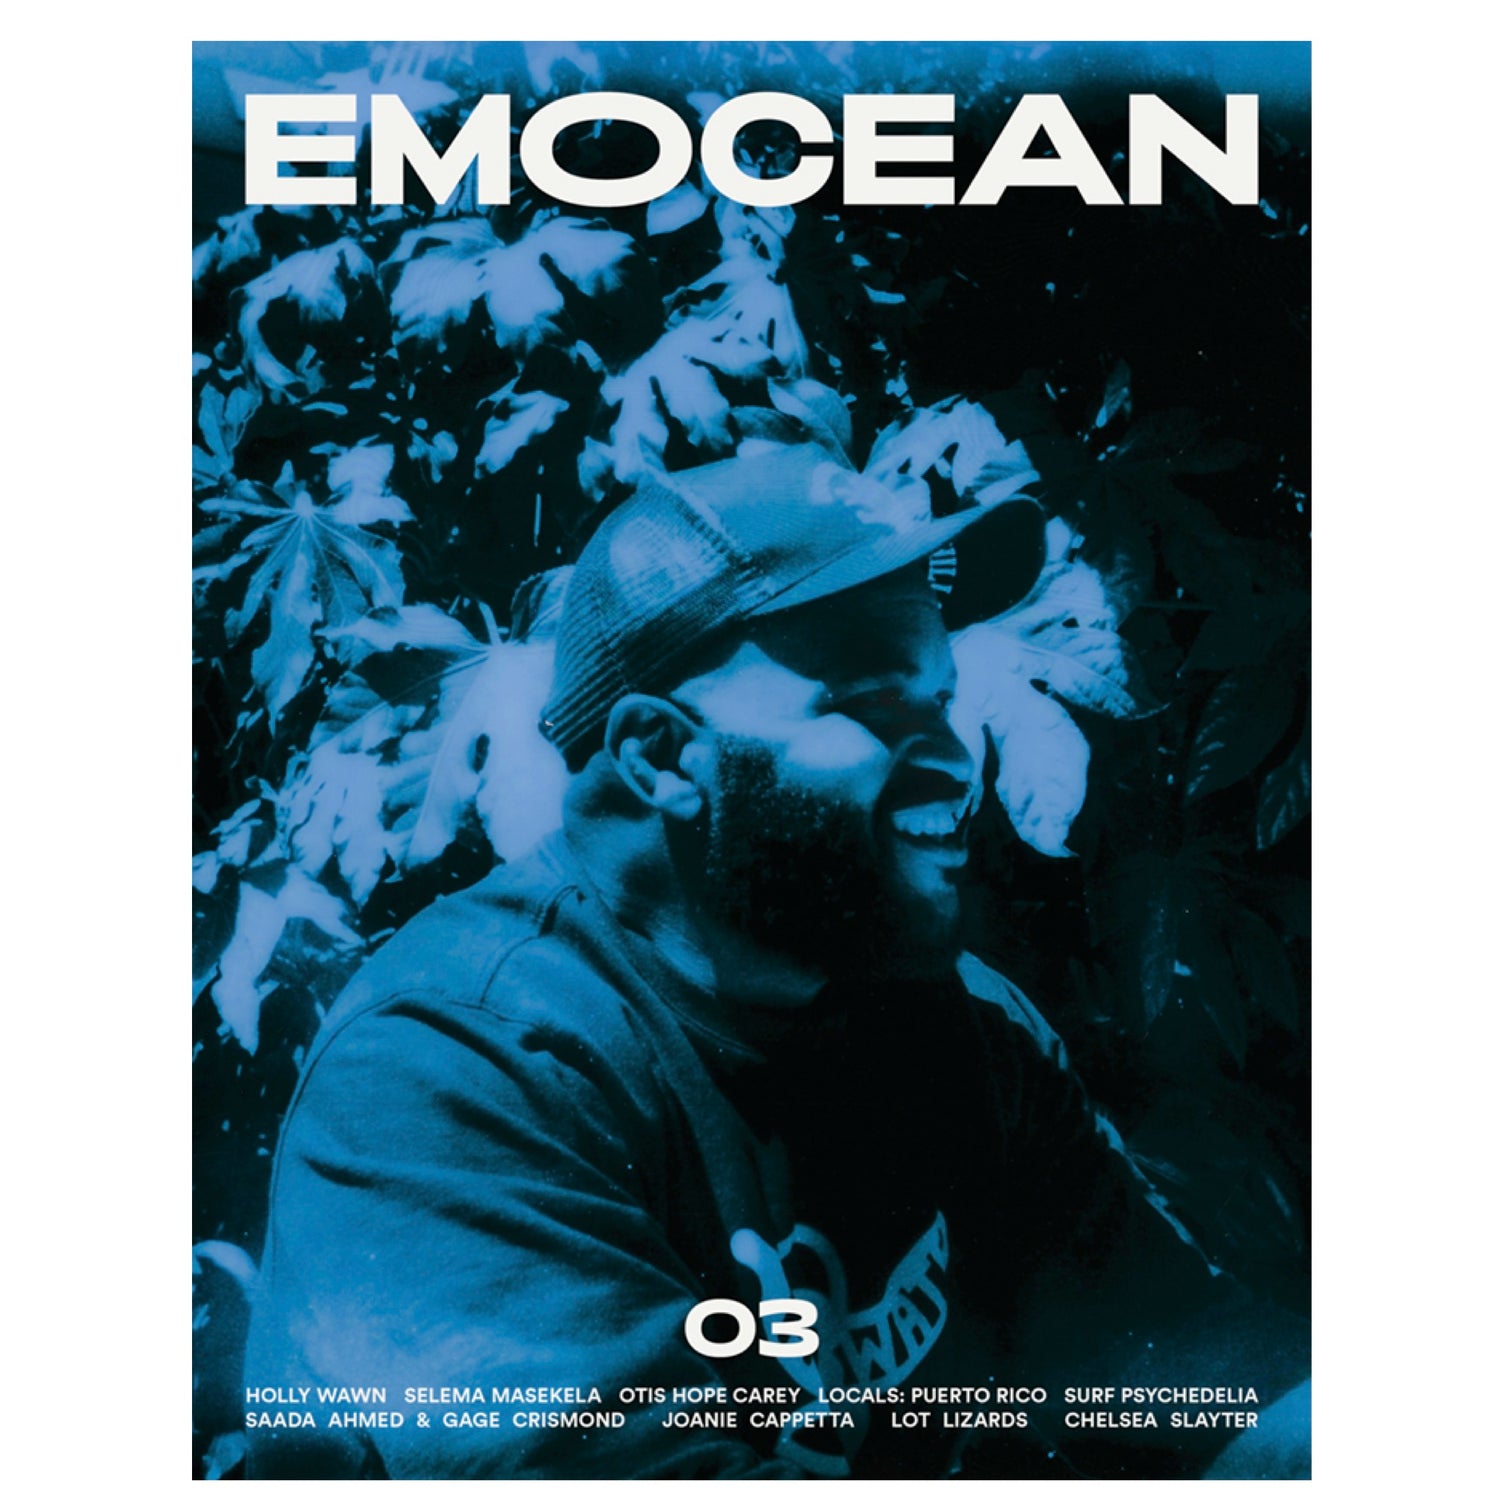 EMOCEAN Magazin - Issue #03 "Connection" - REBEL FIN CO.